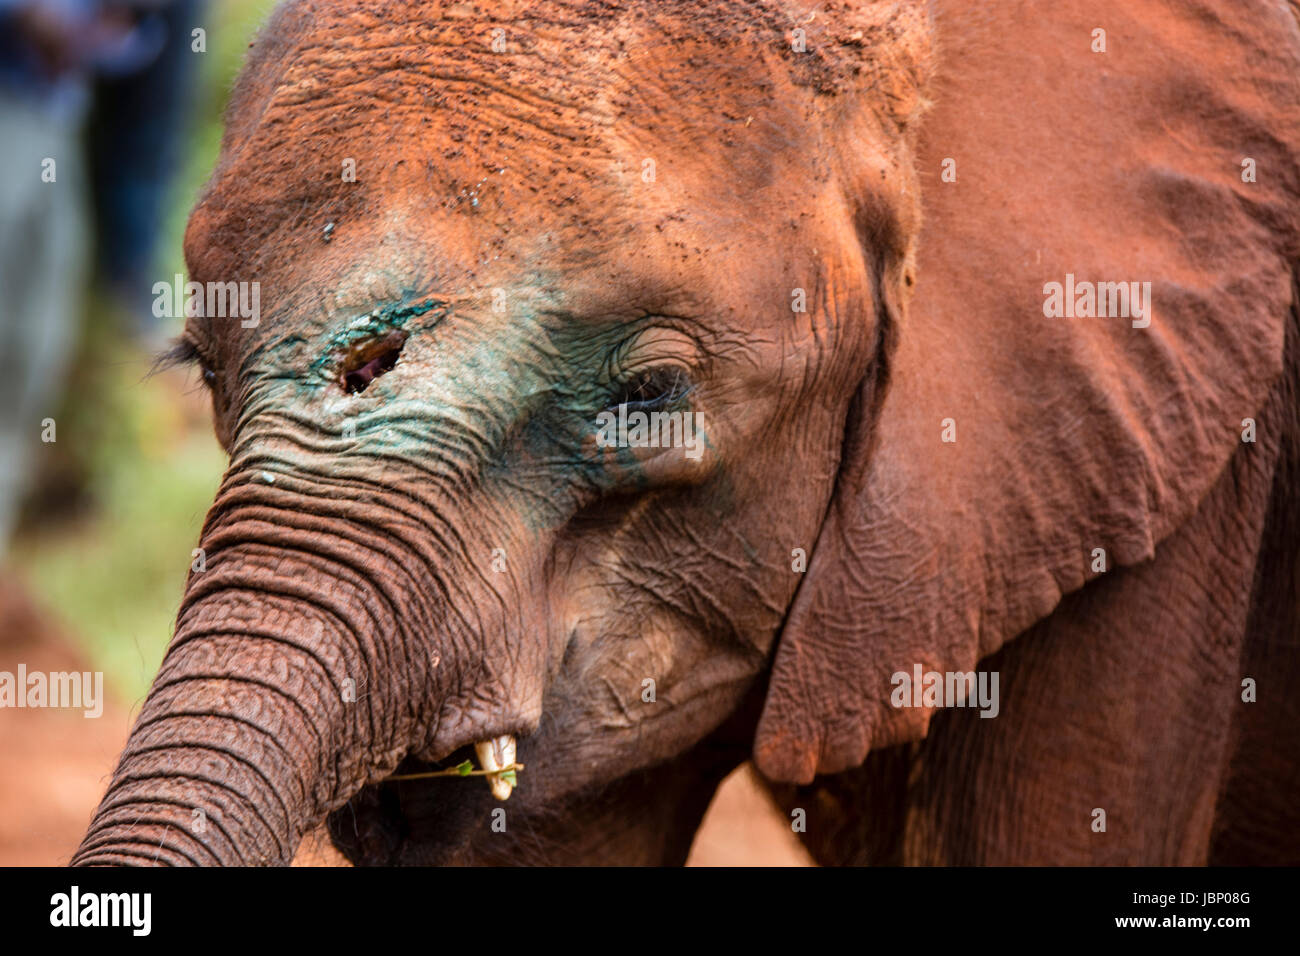 African Elephant calf injured by a spear during the poaching of his mother for her ivory, Sheldrick Elephant Orphanage, Nairobi, East Africa. Stock Photo